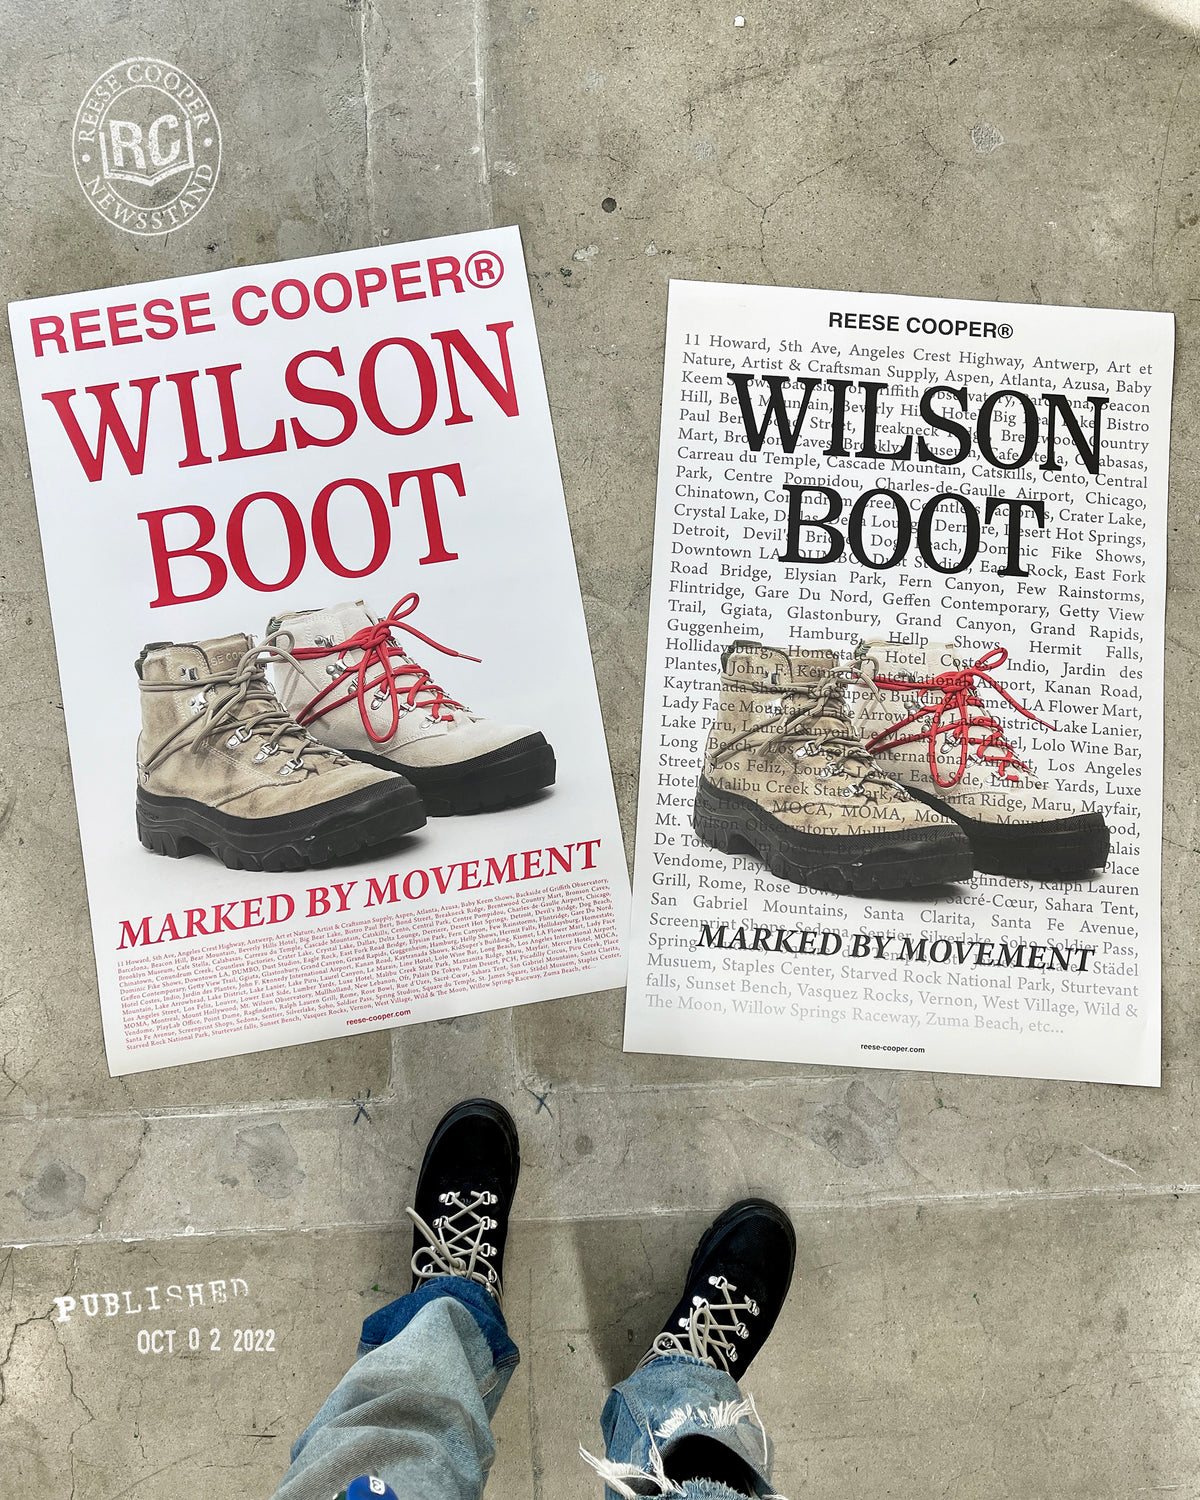 Wilson Boot: Marked by Movement